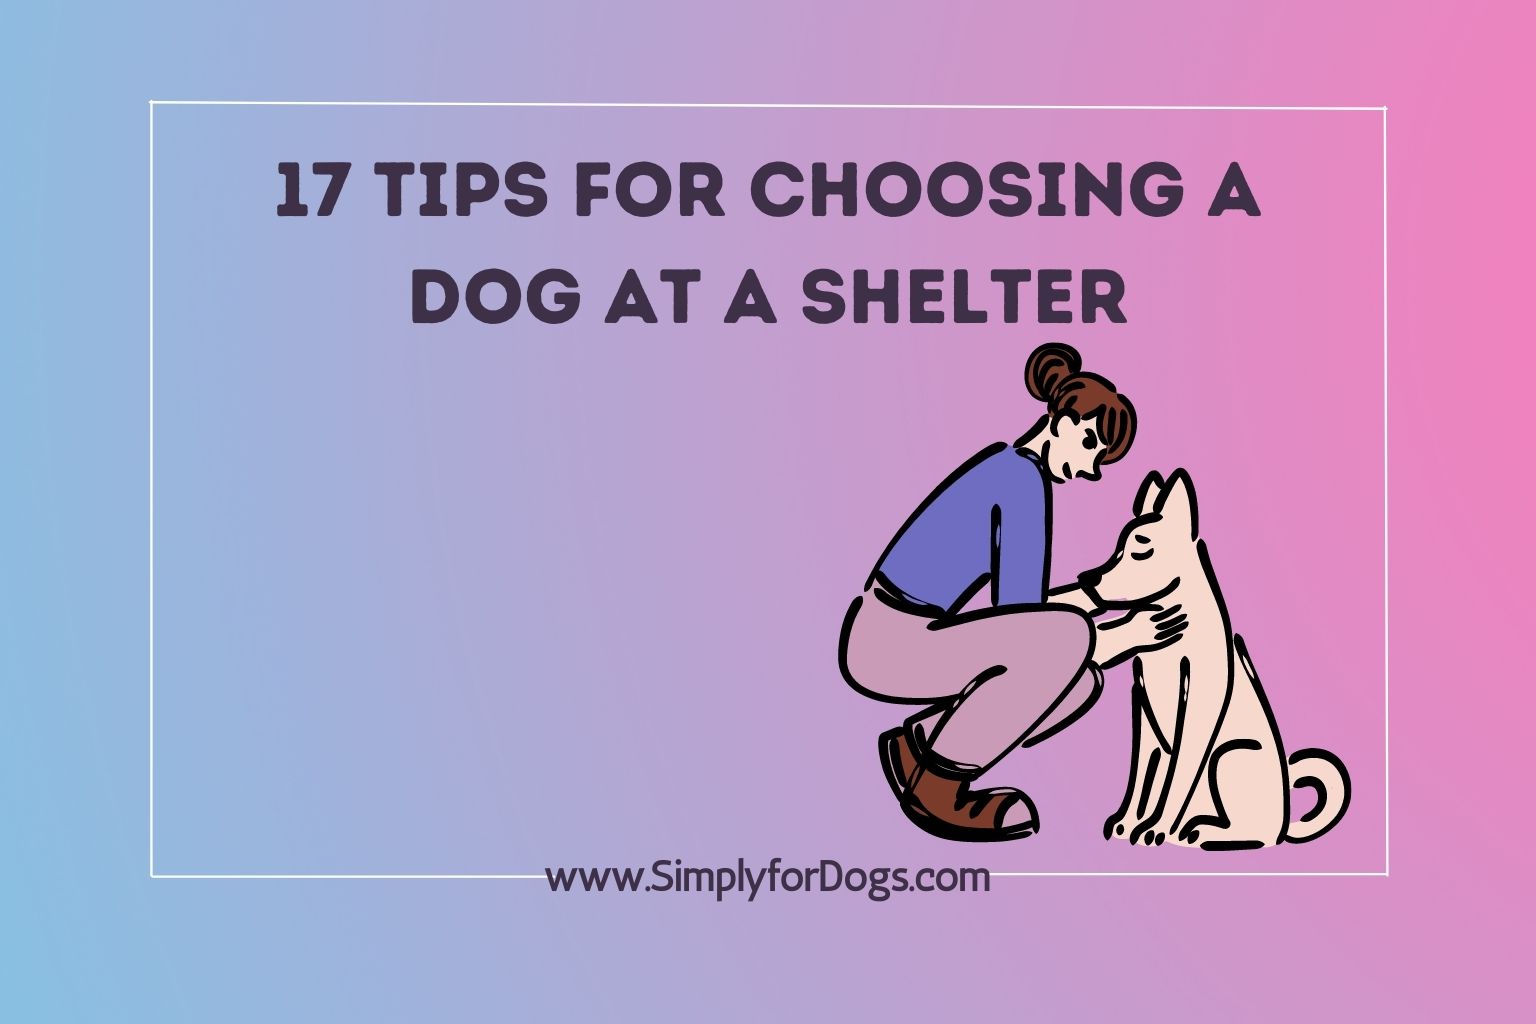 17 Tips for Choosing a Dog at a Shelter